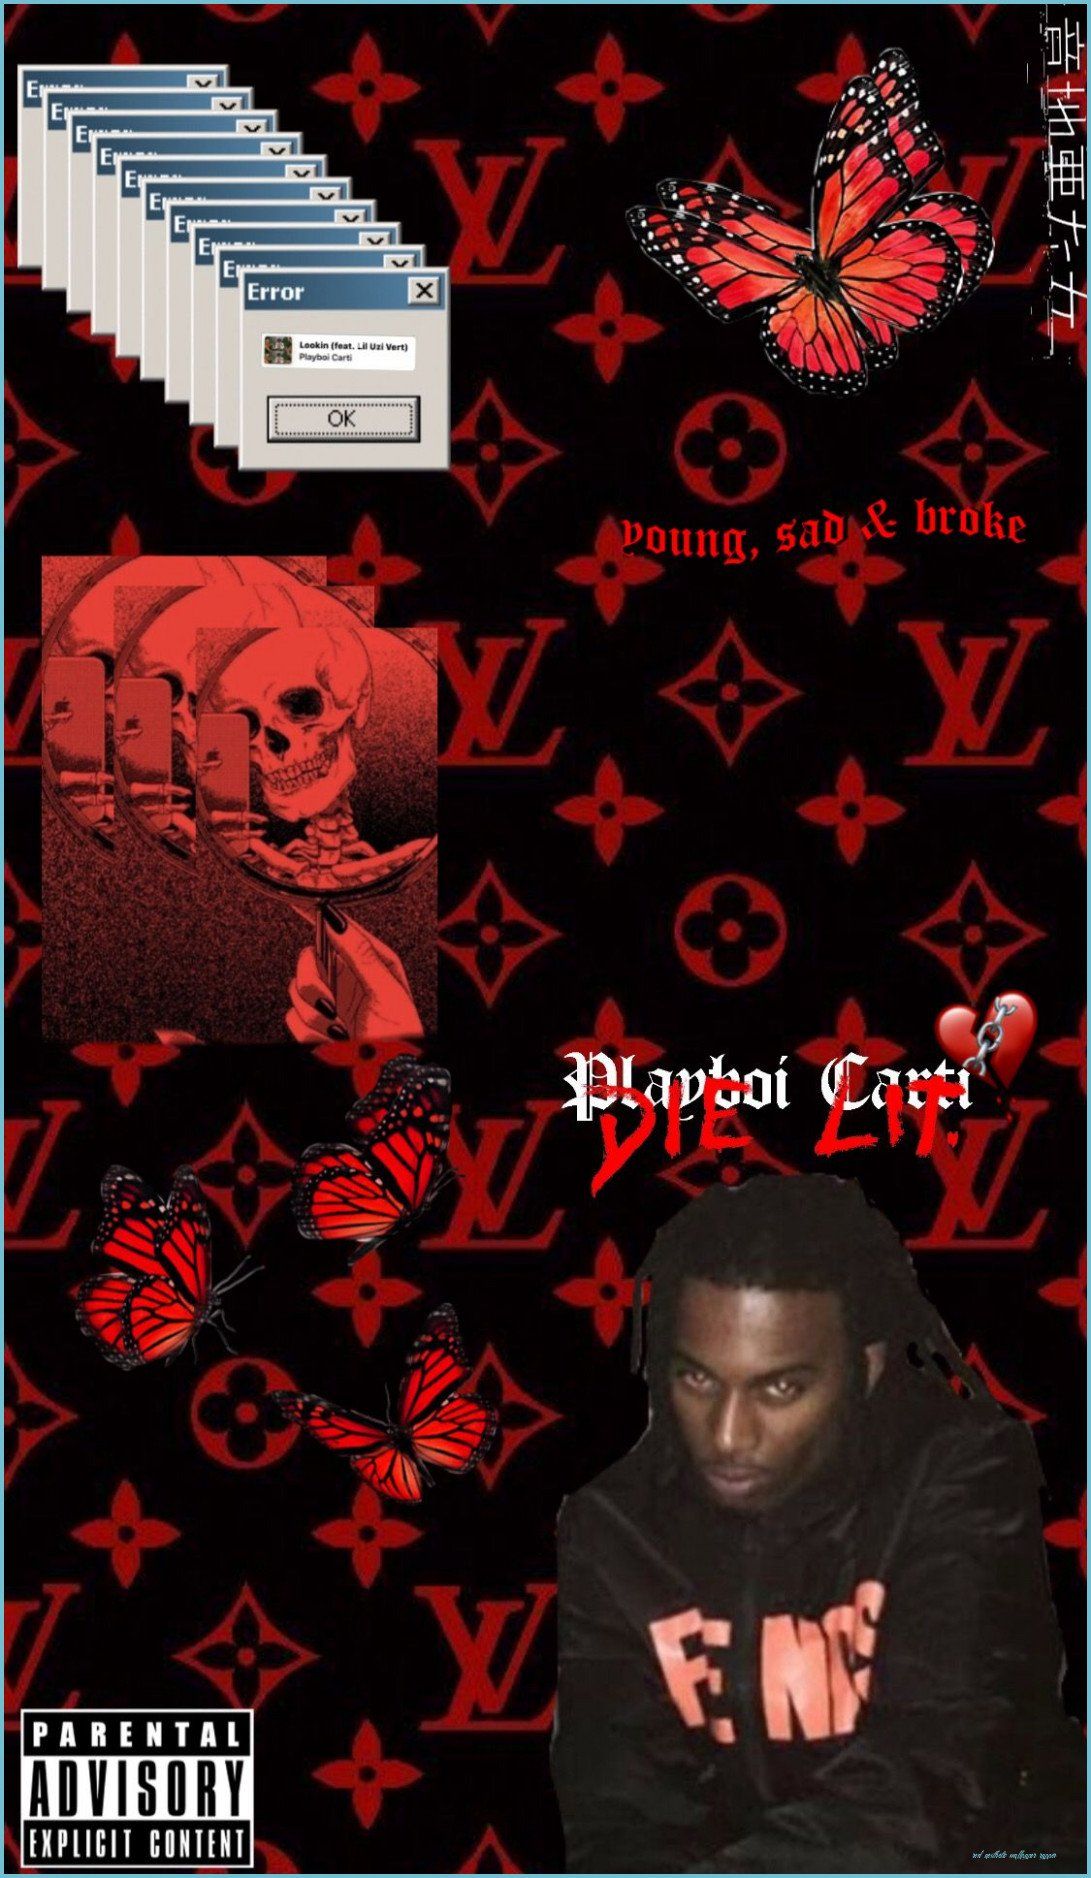 Free download Playboi Carti x LV in 12 Rapper wallpaper iphone Red red [1091x1878] for your Desktop, Mobile & Tablet. Explore Aesthetic Rapper Wallpaper. Rapper Wallpaper, Rapper Wallpaper, Future Rapper Wallpaper